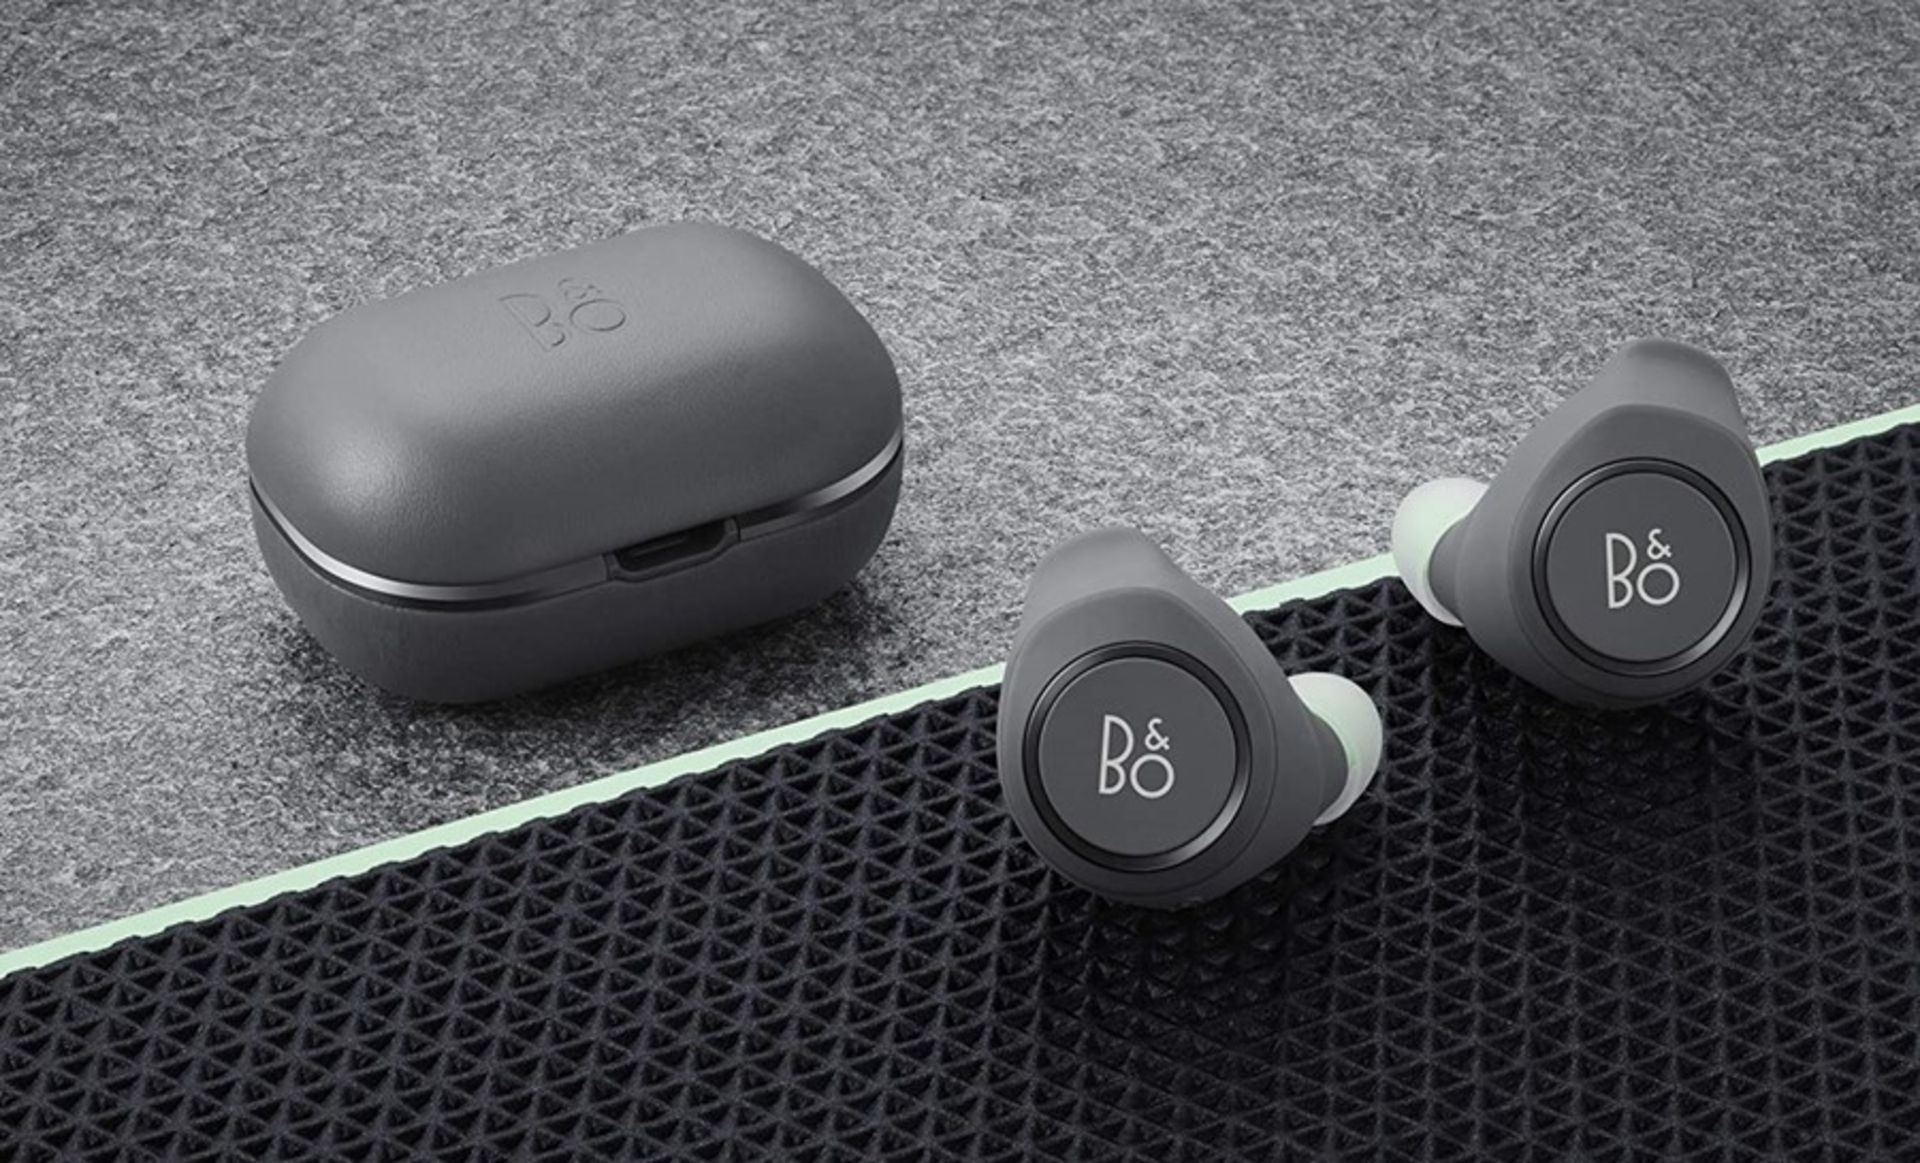 1 x set of Grey Bang and Olufsen E8 wireless earphones, boxed and brand new, Collection Tuesday : - Image 3 of 3